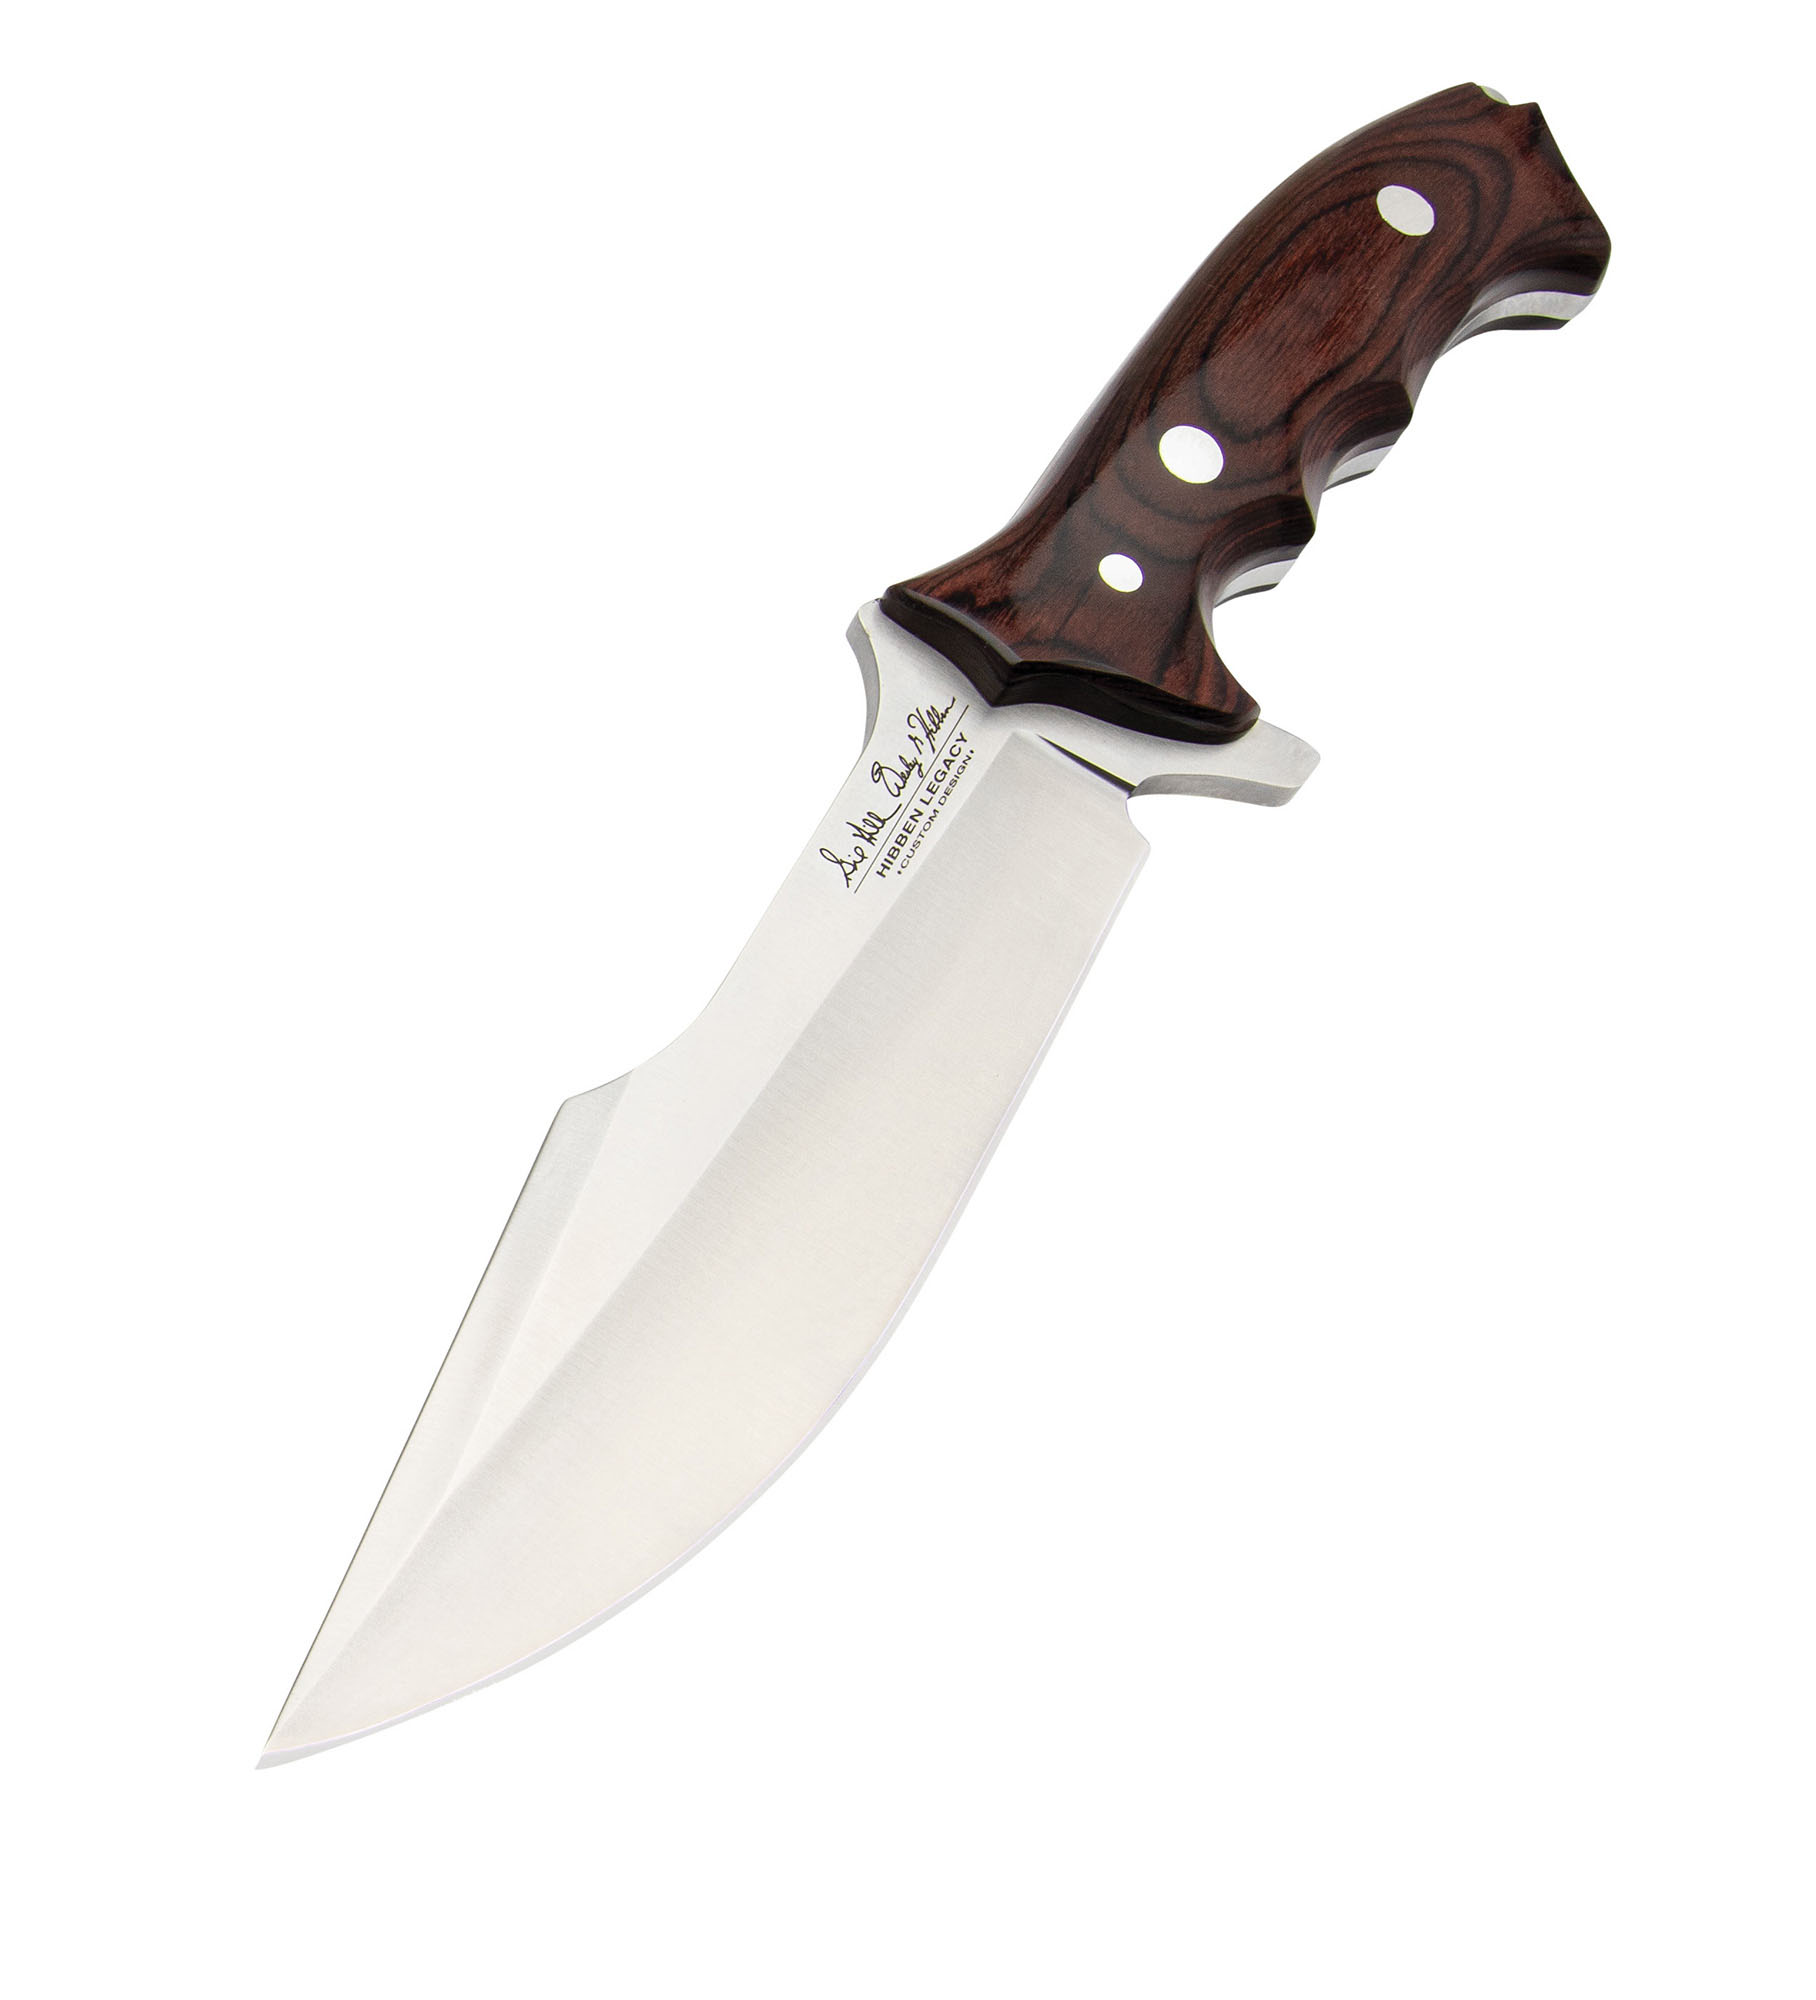 Hibben Legacy Fighter IV with sheath